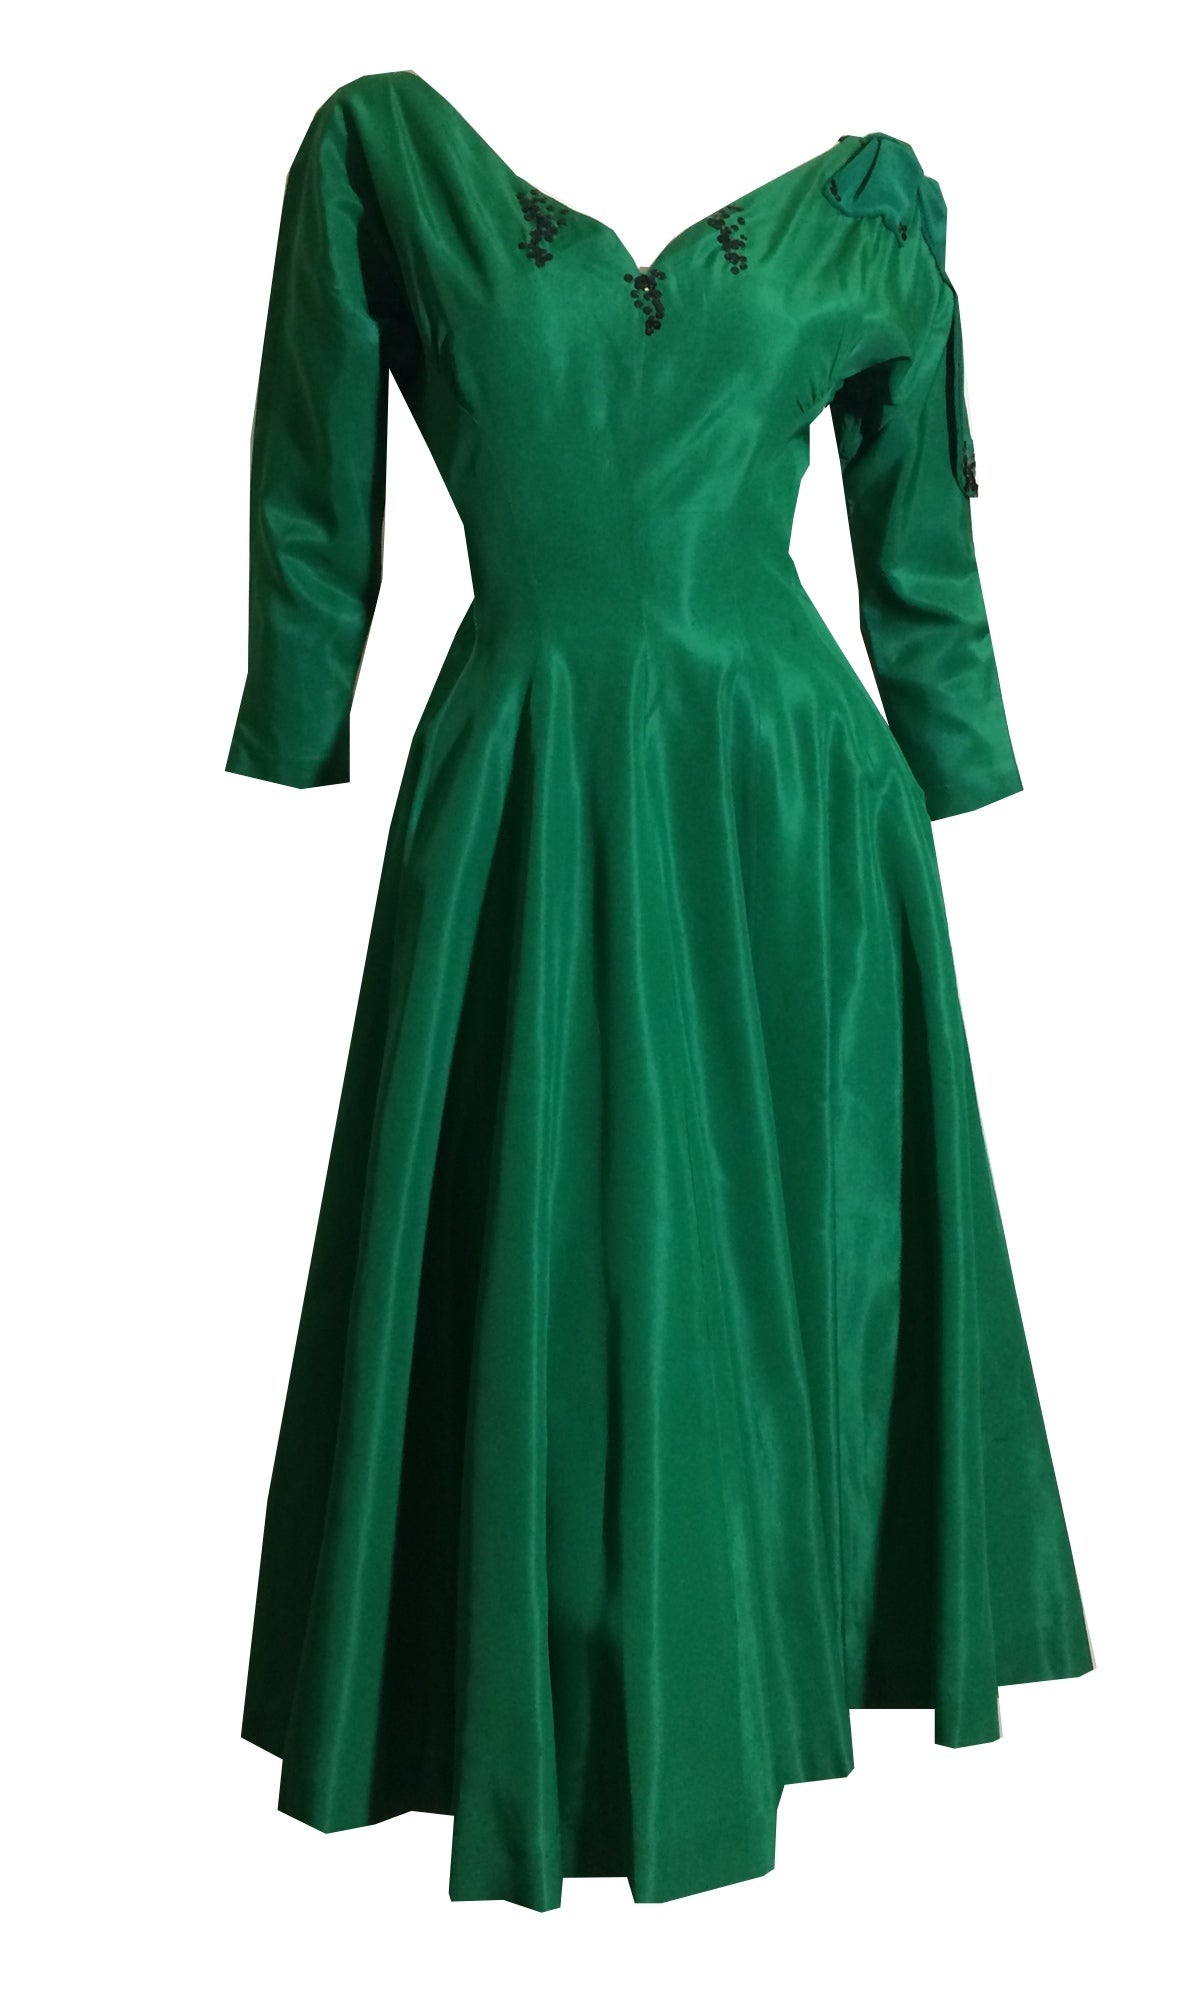 Emerald Green Silk Taffeta Party Dress with Shoulder Bow and Button Back circa 1950s